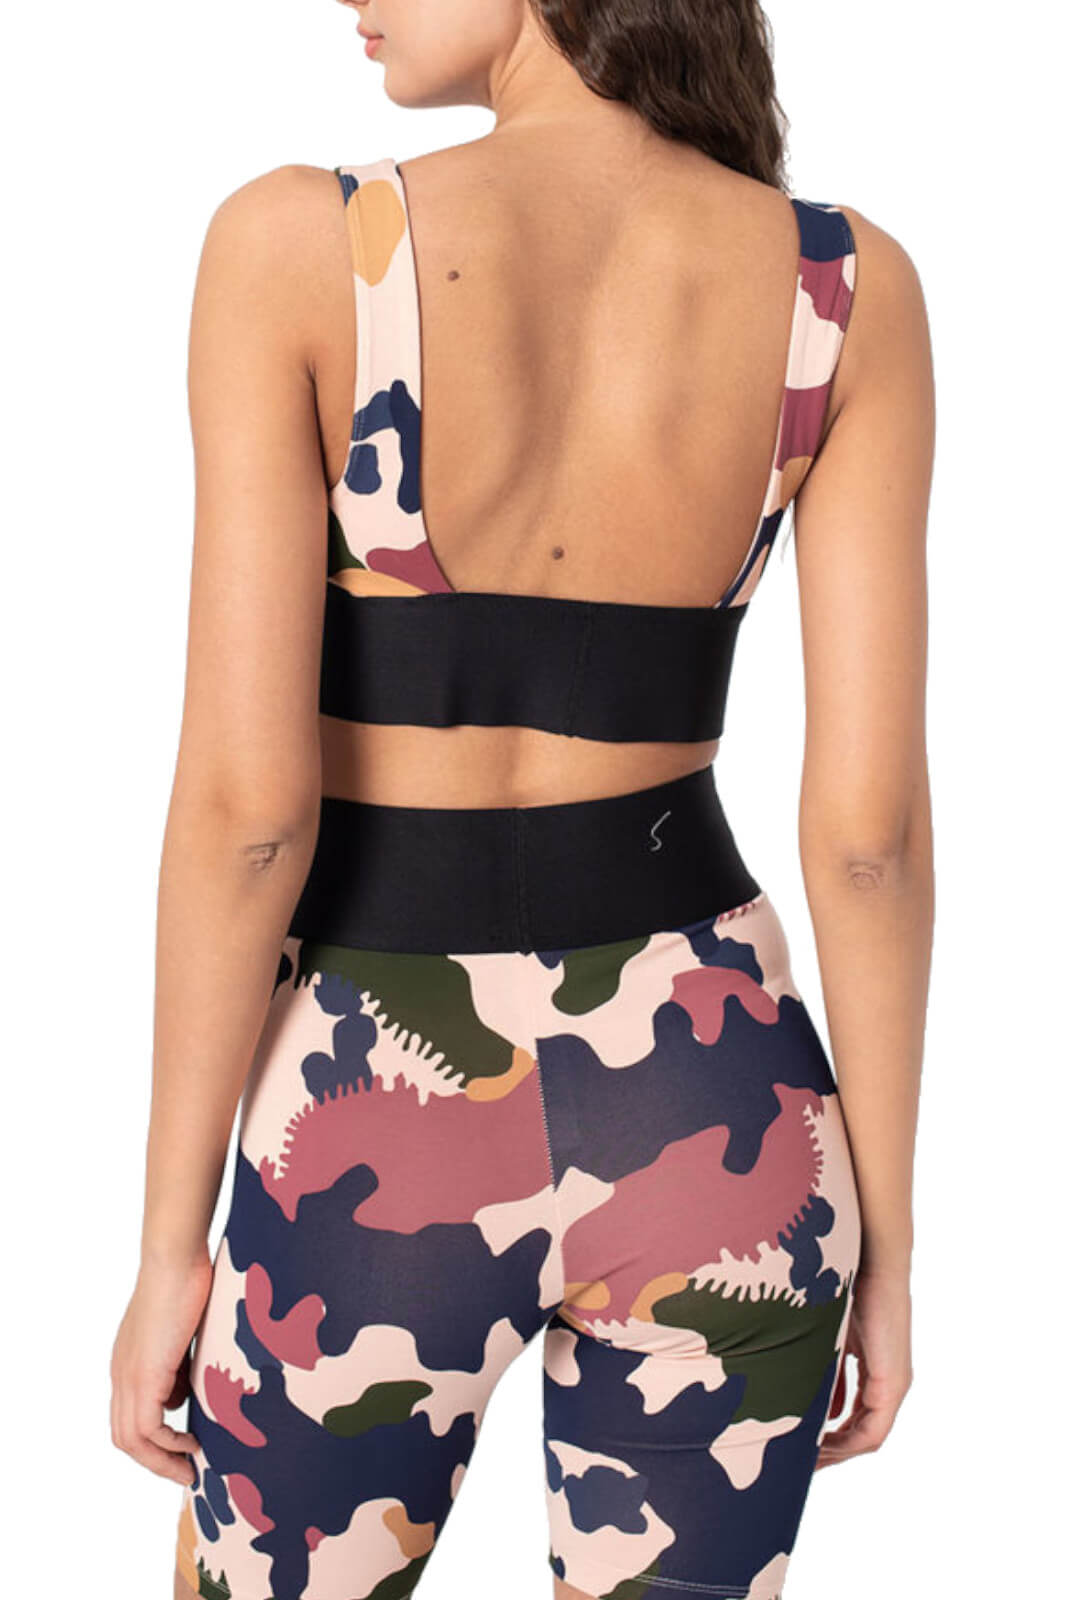 Diesel Women's Top with camouflage pattern